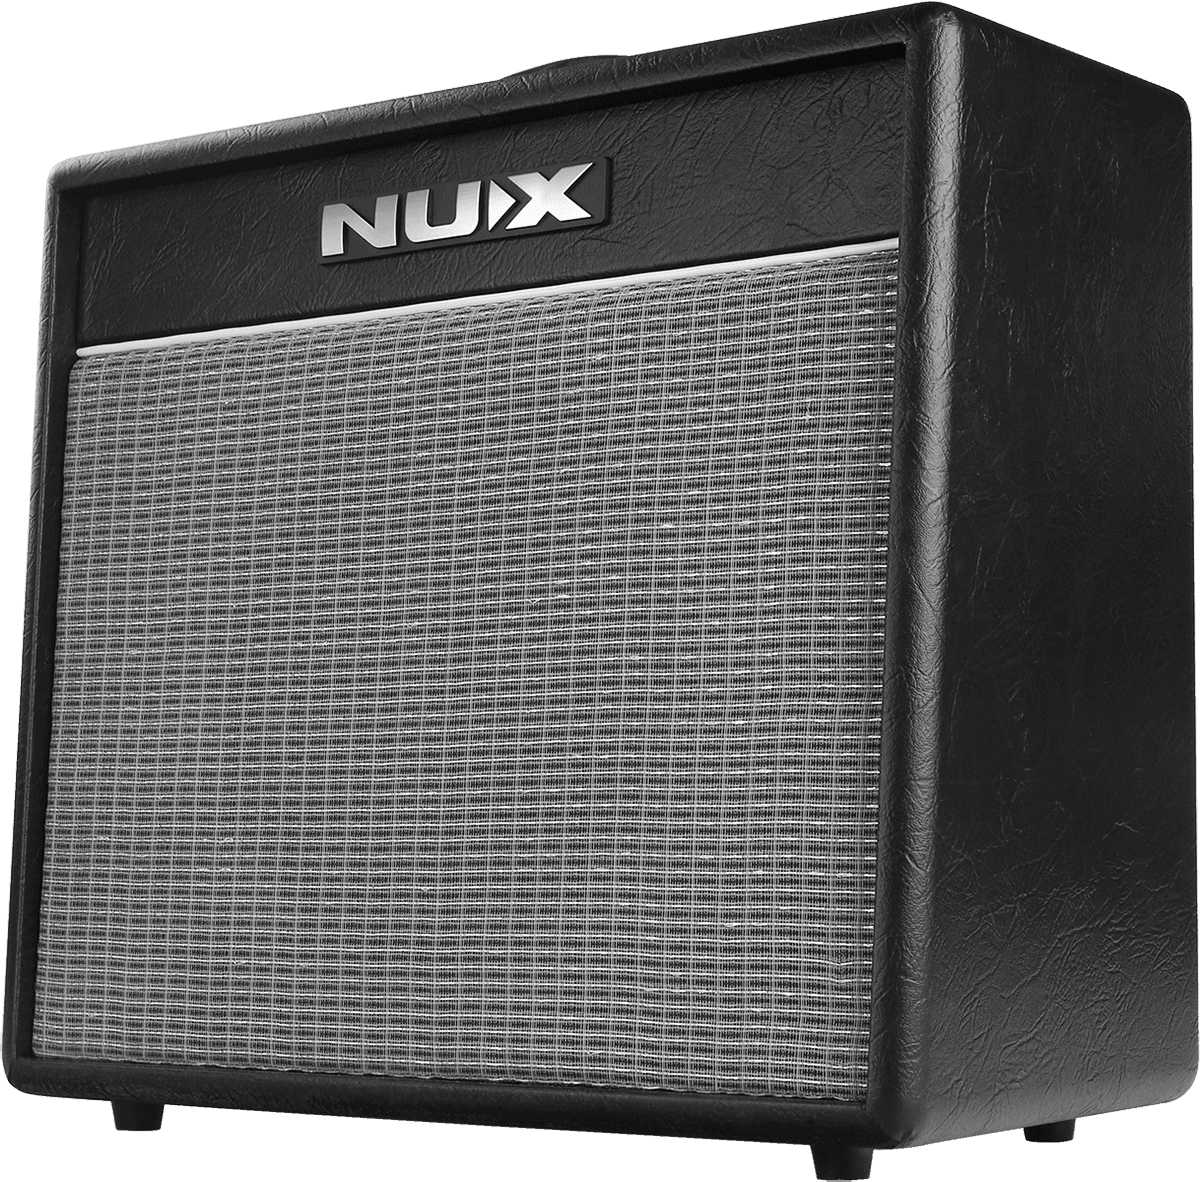 Nux Mighty 40 Bt 40w 1x10 - Electric guitar combo amp - Variation 4